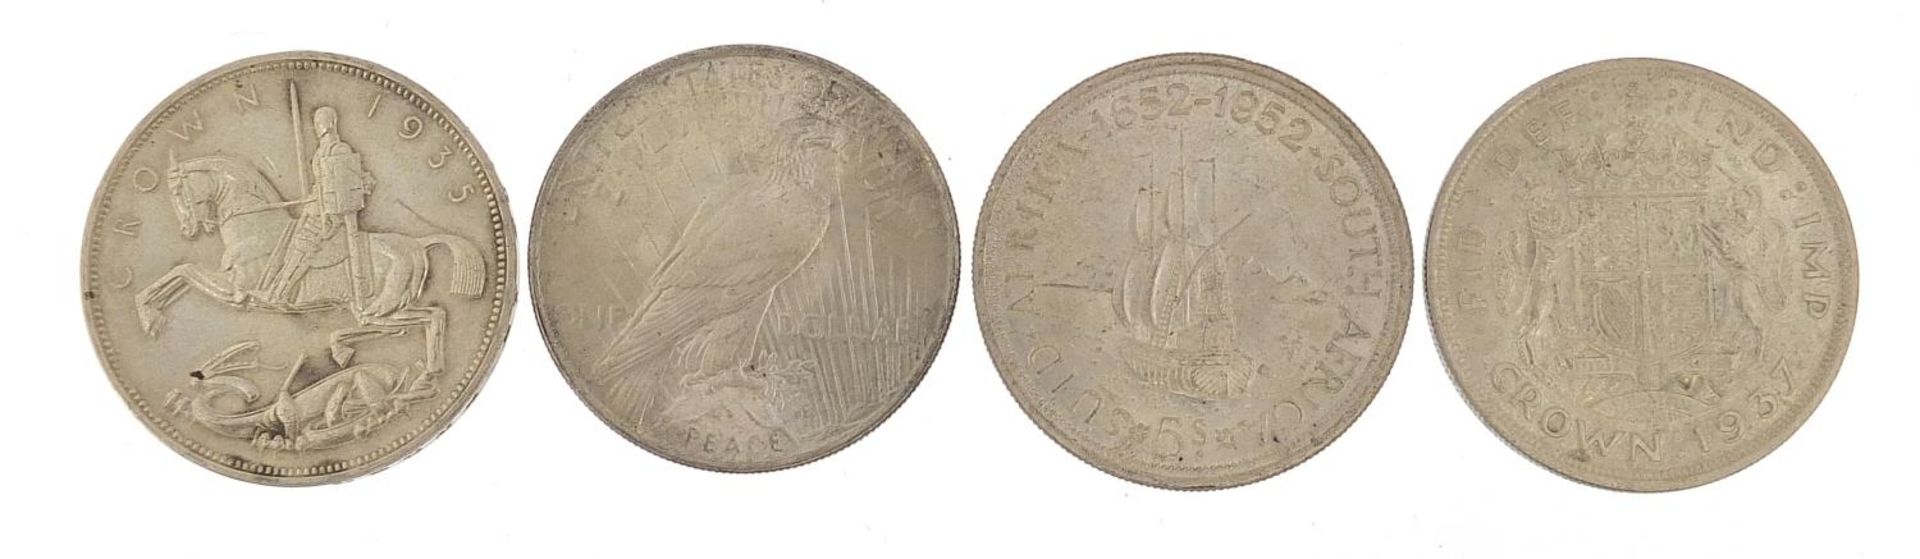 Two 1935 Rocking Horse crowns, 1922 dollar and 1952 South African example